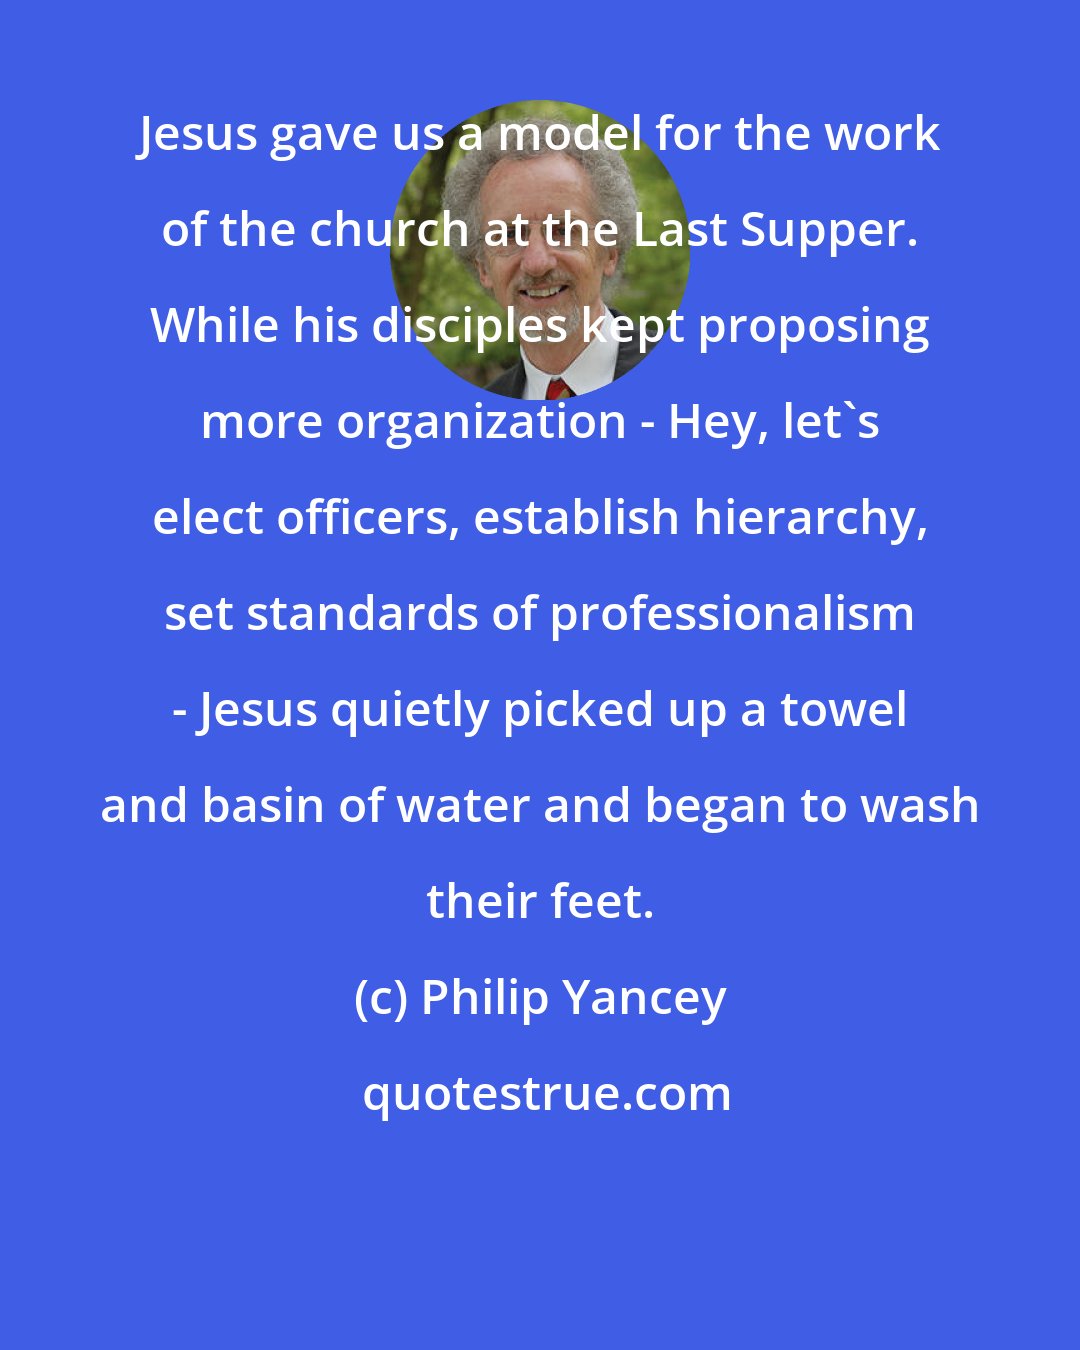 Philip Yancey: Jesus gave us a model for the work of the church at the Last Supper. While his disciples kept proposing more organization - Hey, let's elect officers, establish hierarchy, set standards of professionalism - Jesus quietly picked up a towel and basin of water and began to wash their feet.